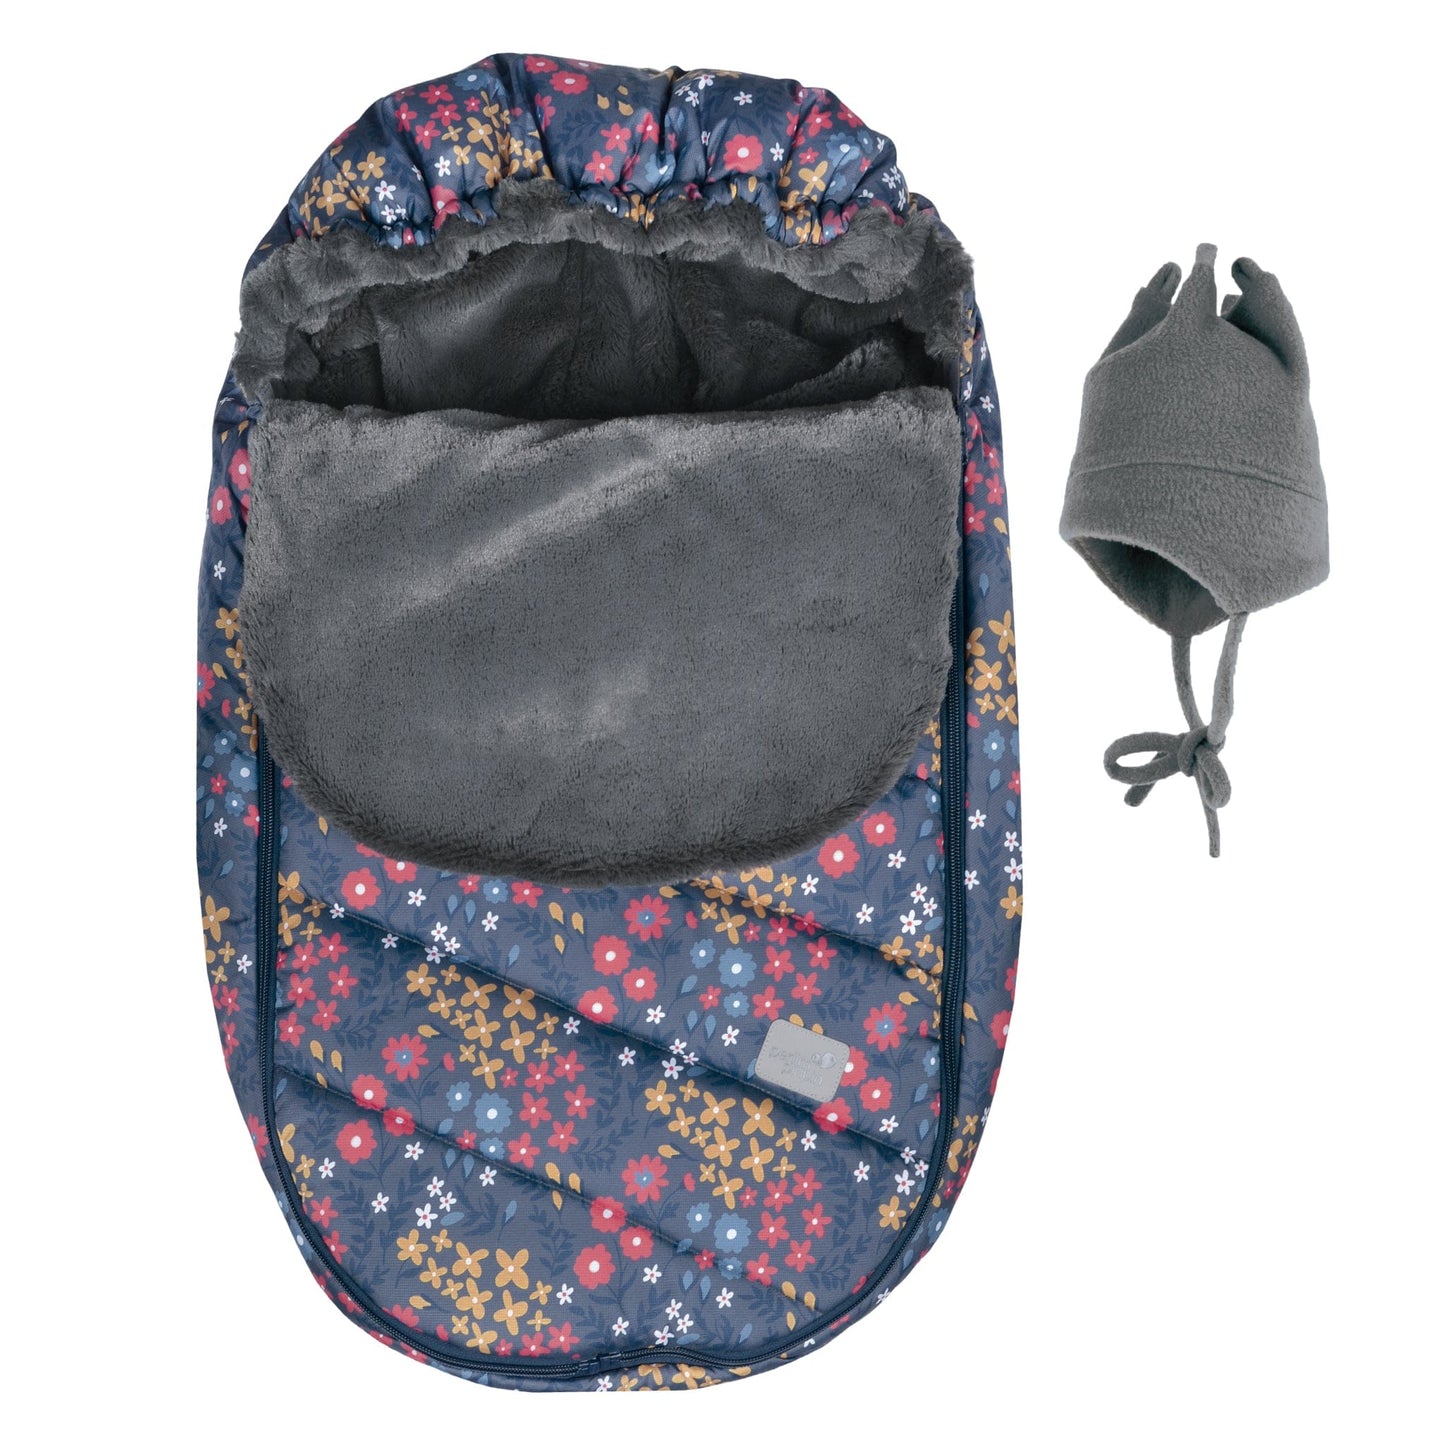 Baby car seat cover for winter - Pink Flora